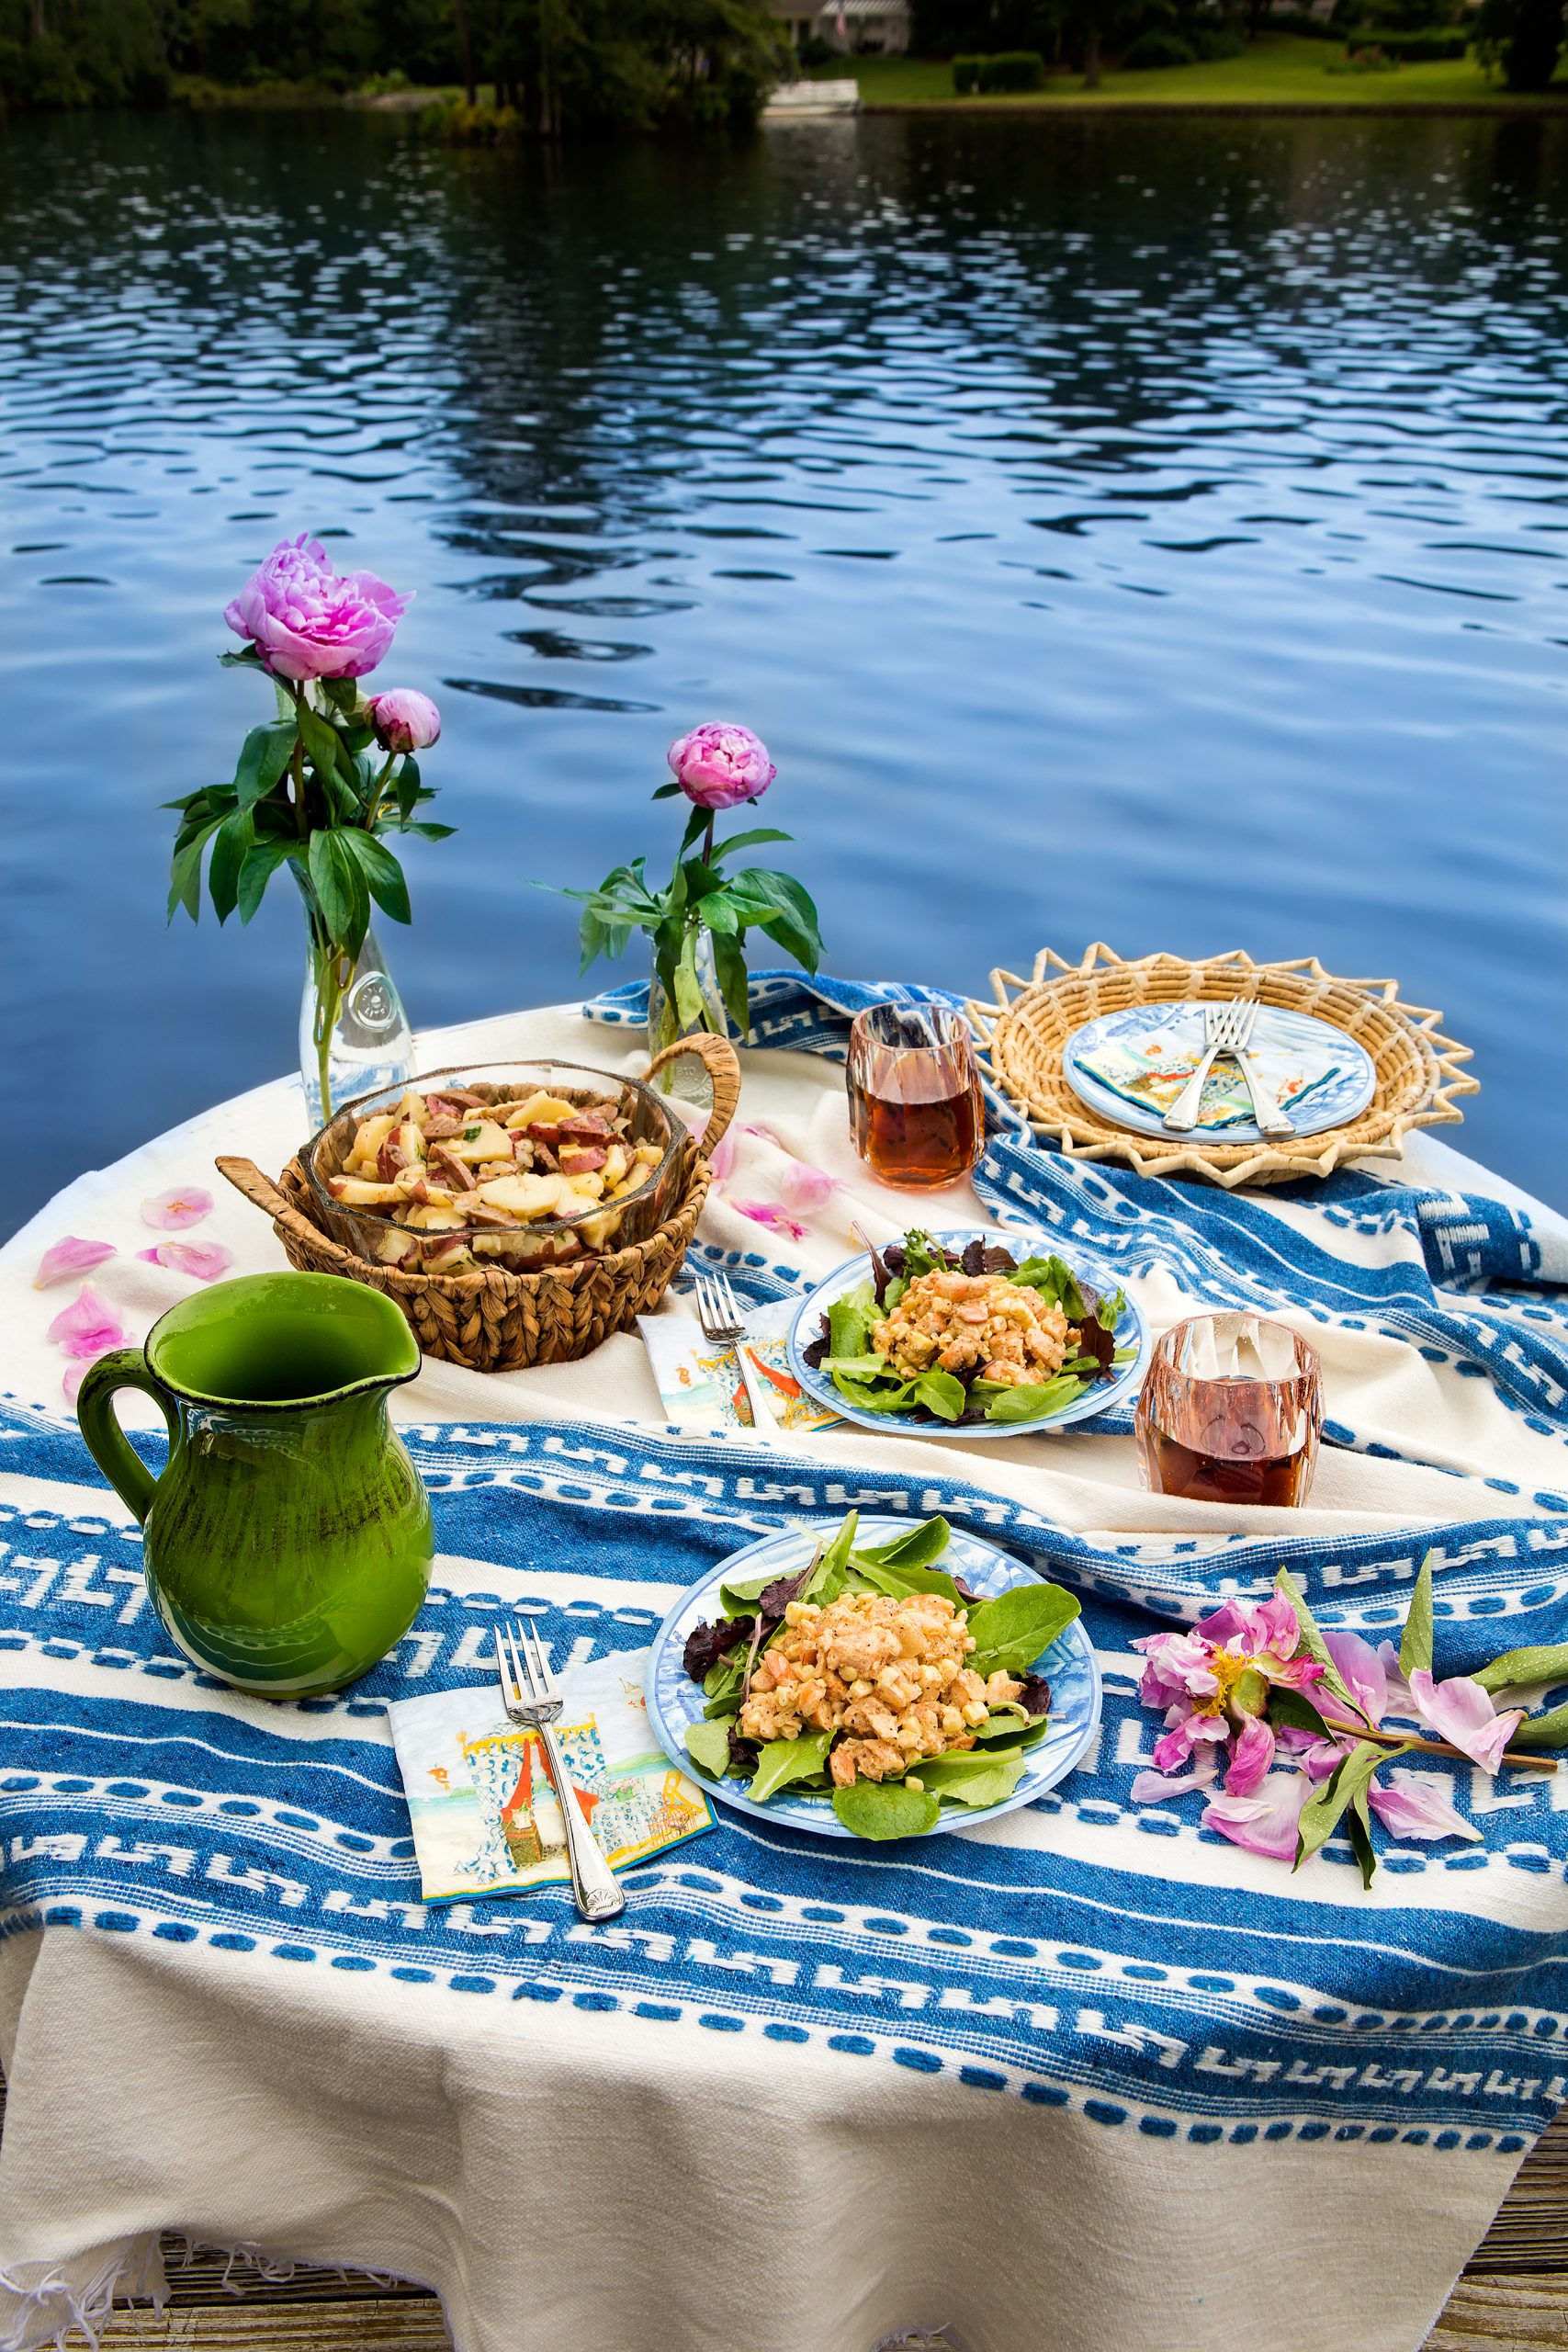 Picnic on your boat, dock, or the wonderful water’s edge. This is a great opportunity to show your style with picnic blankets, flowers, and fun napkins. Shrimp salad is the perfect summer treat! 